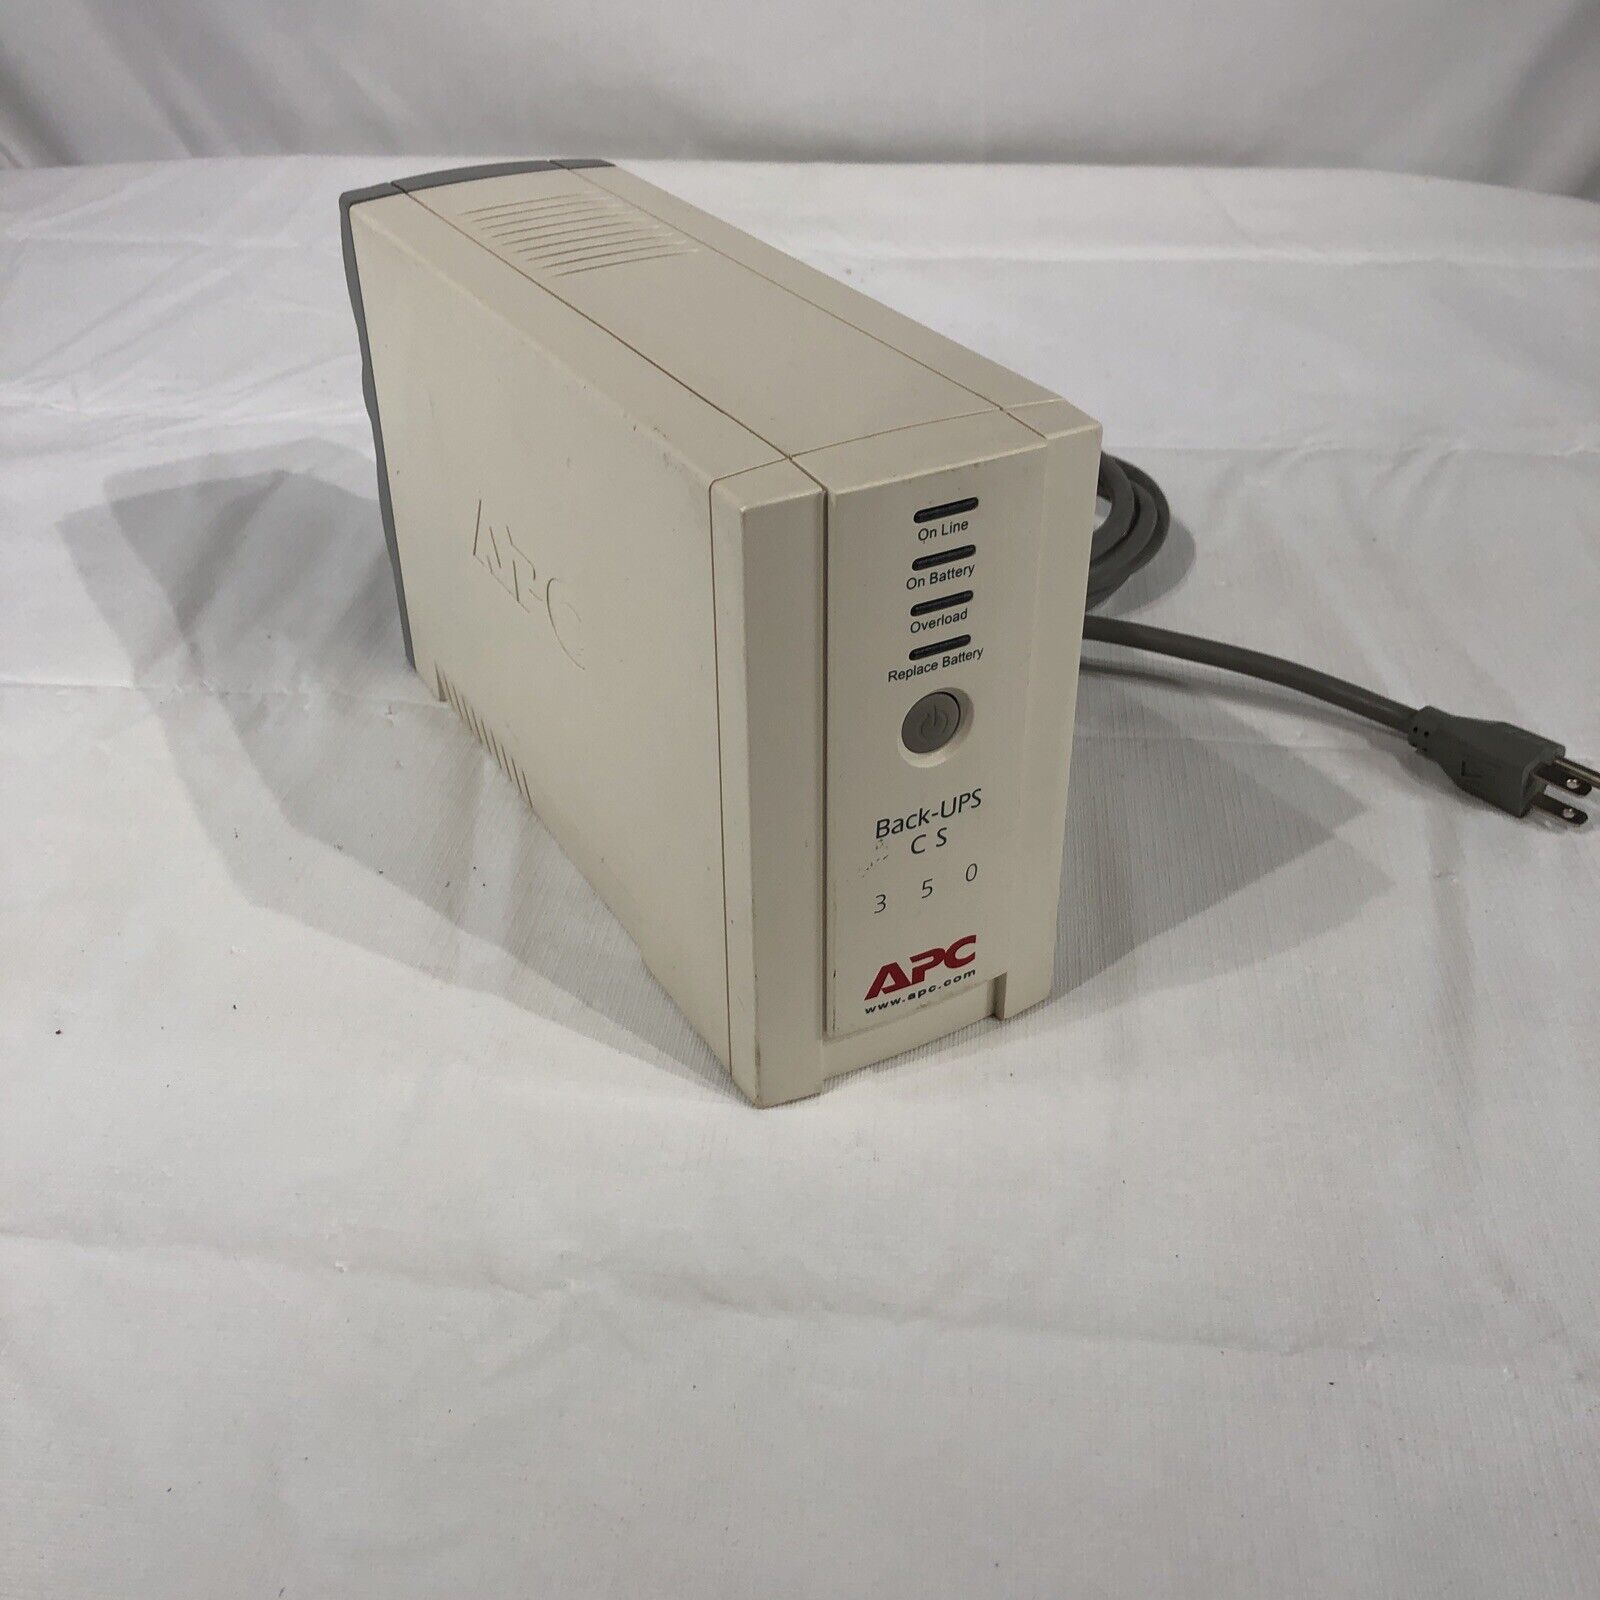 APC BACK-UPS CS350 BK350 Uninterruptible Power Supply 6 Outlets WORKING W/Cables